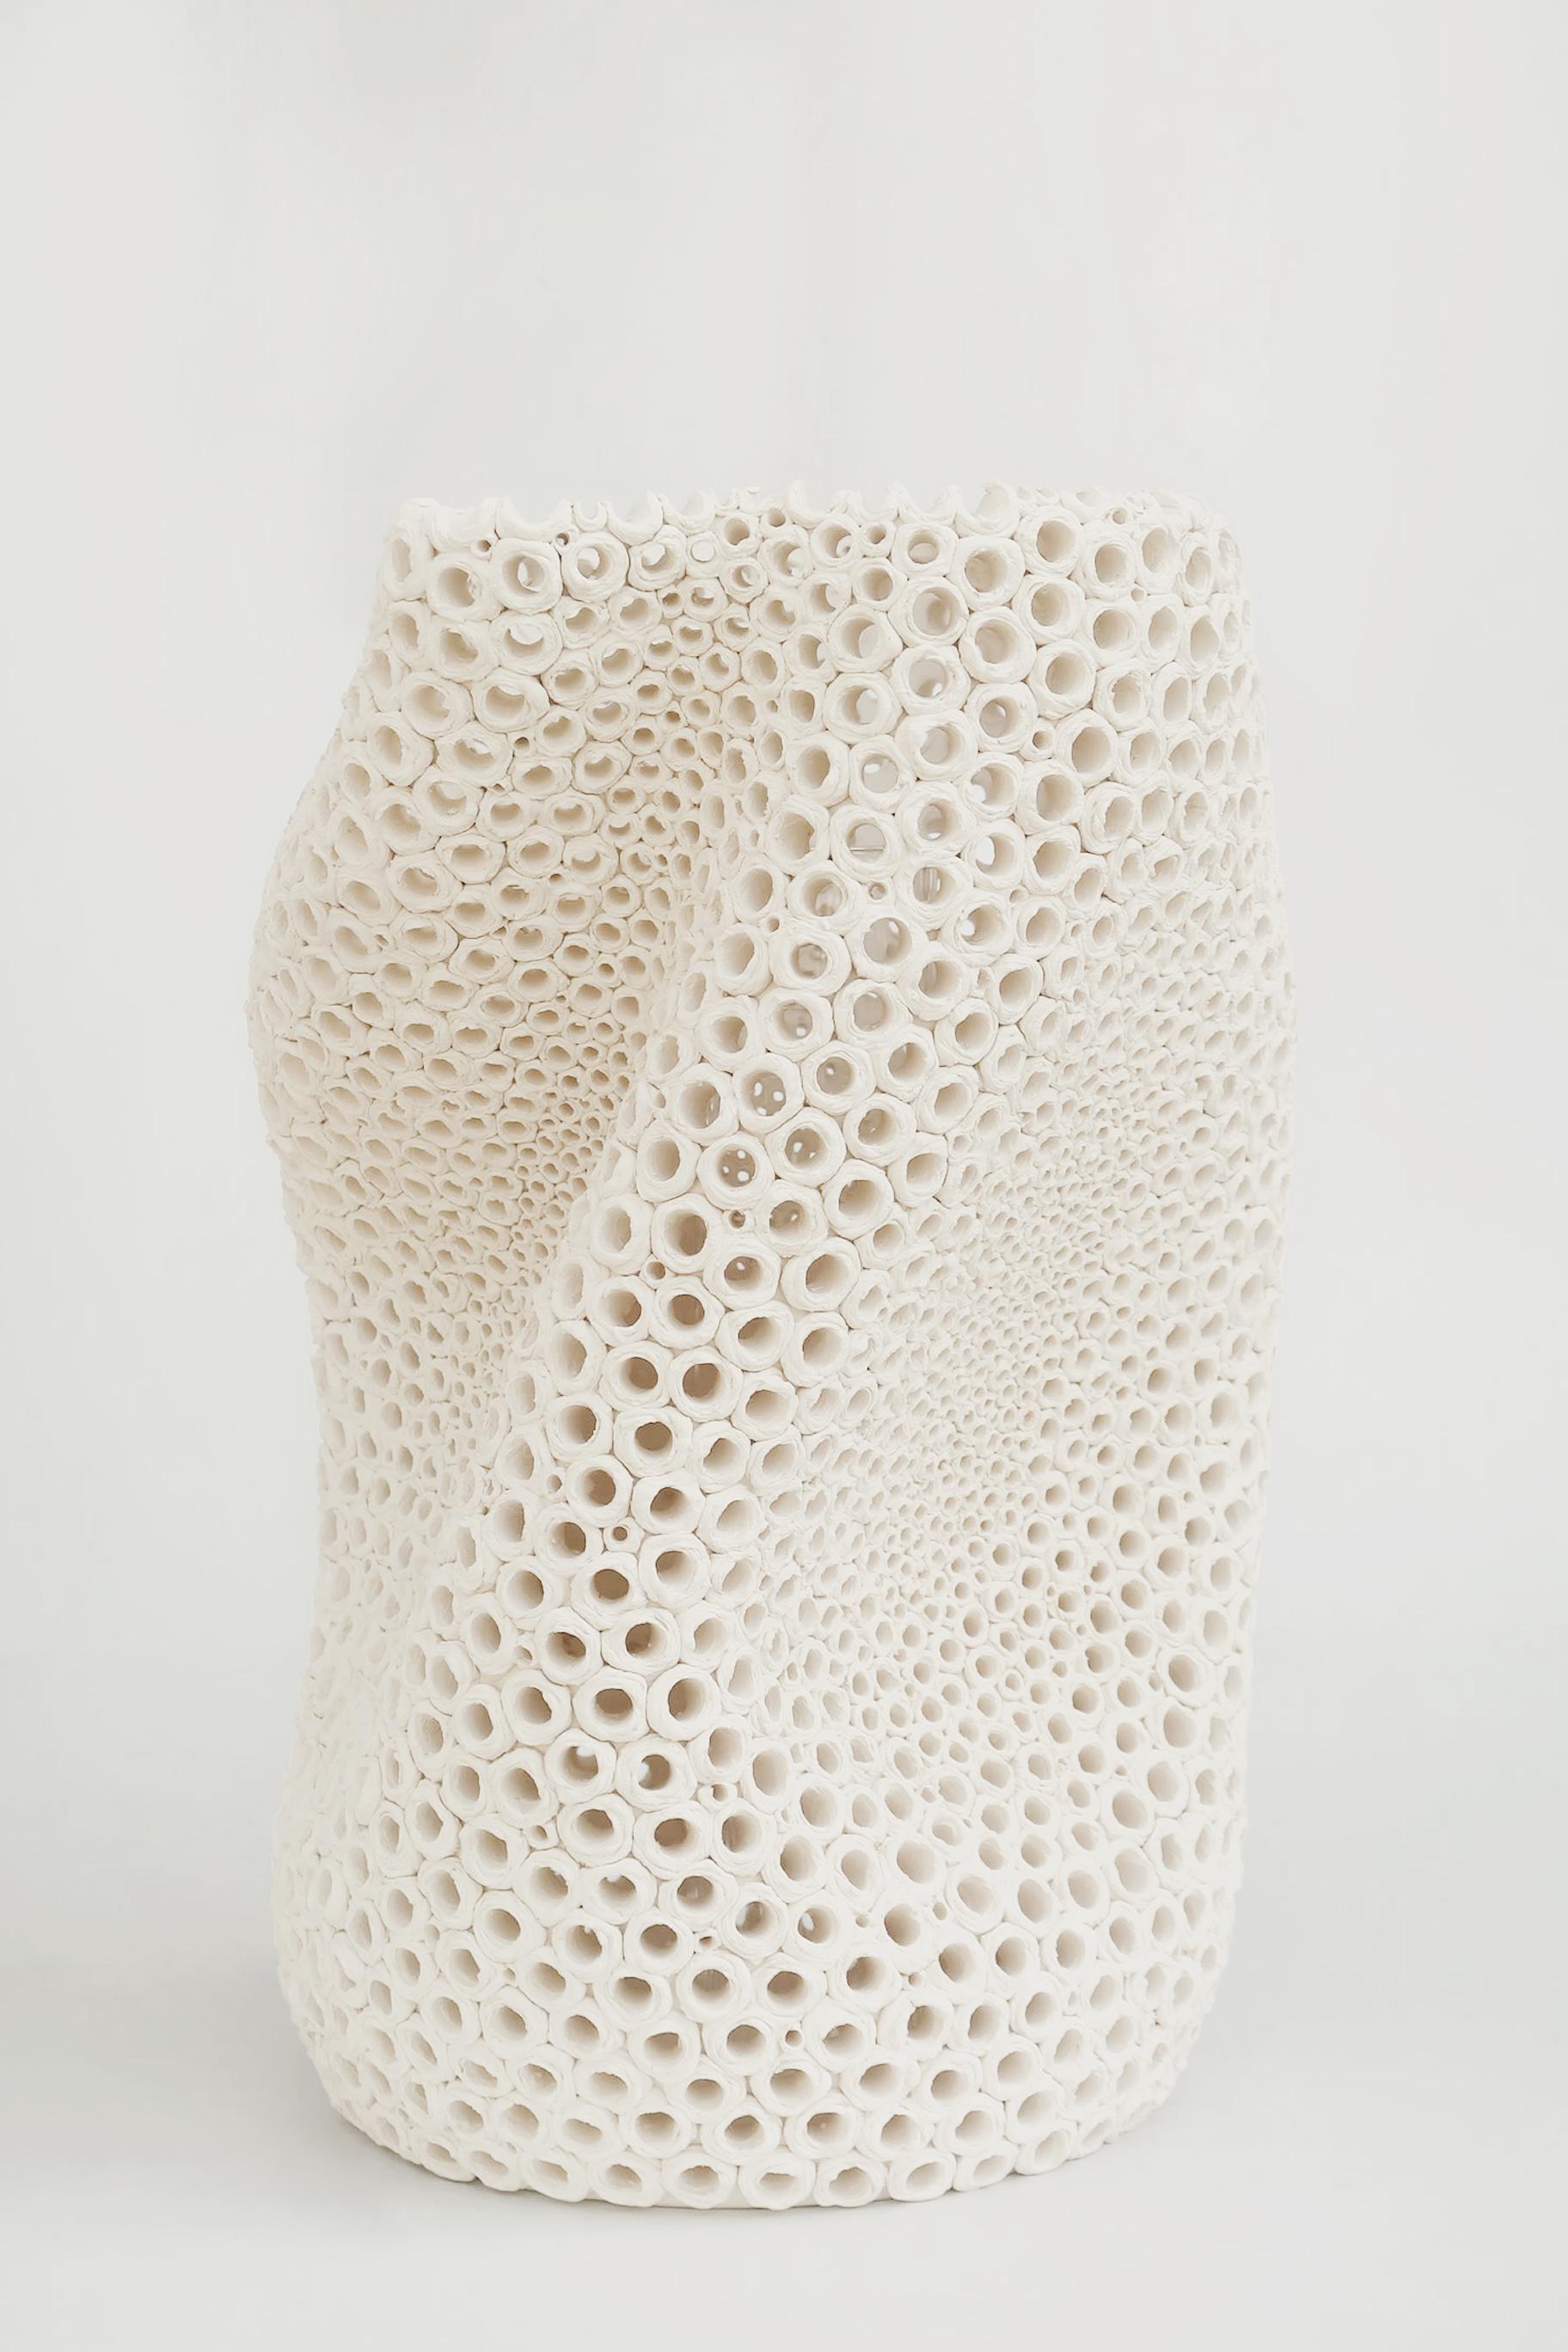 Modern Undulating Hand-Pierced Limited Edition Earthenware Vase by Gilles Caffier For Sale